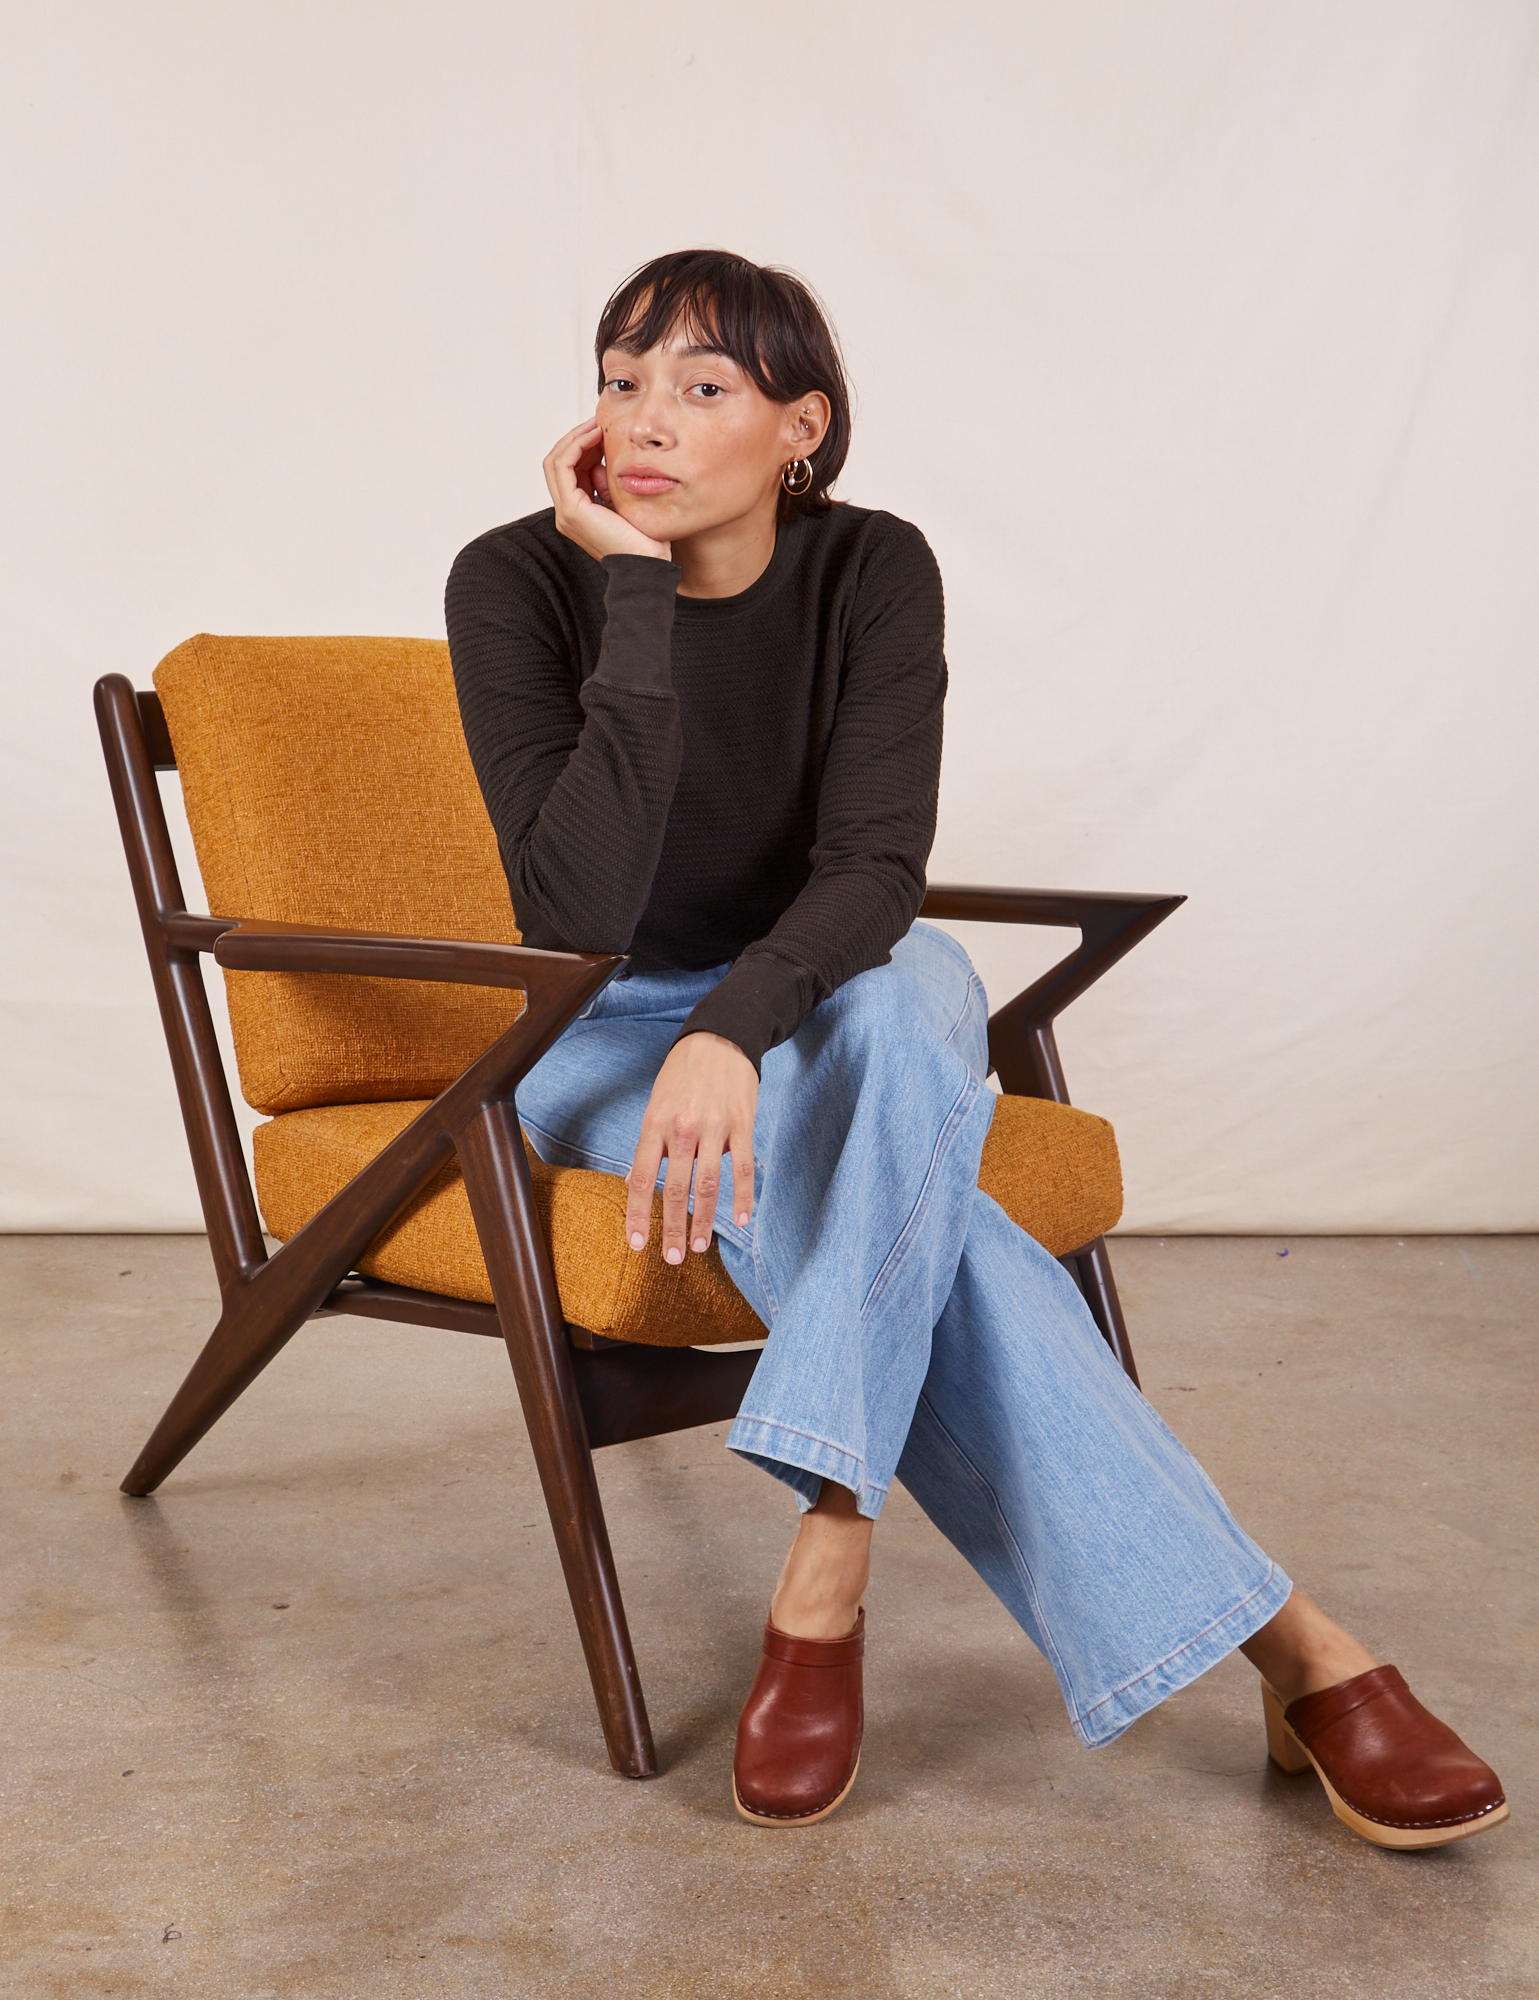 Tiara is wearing Honeycomb Thermal in Espresso Brown and sitting in a chair